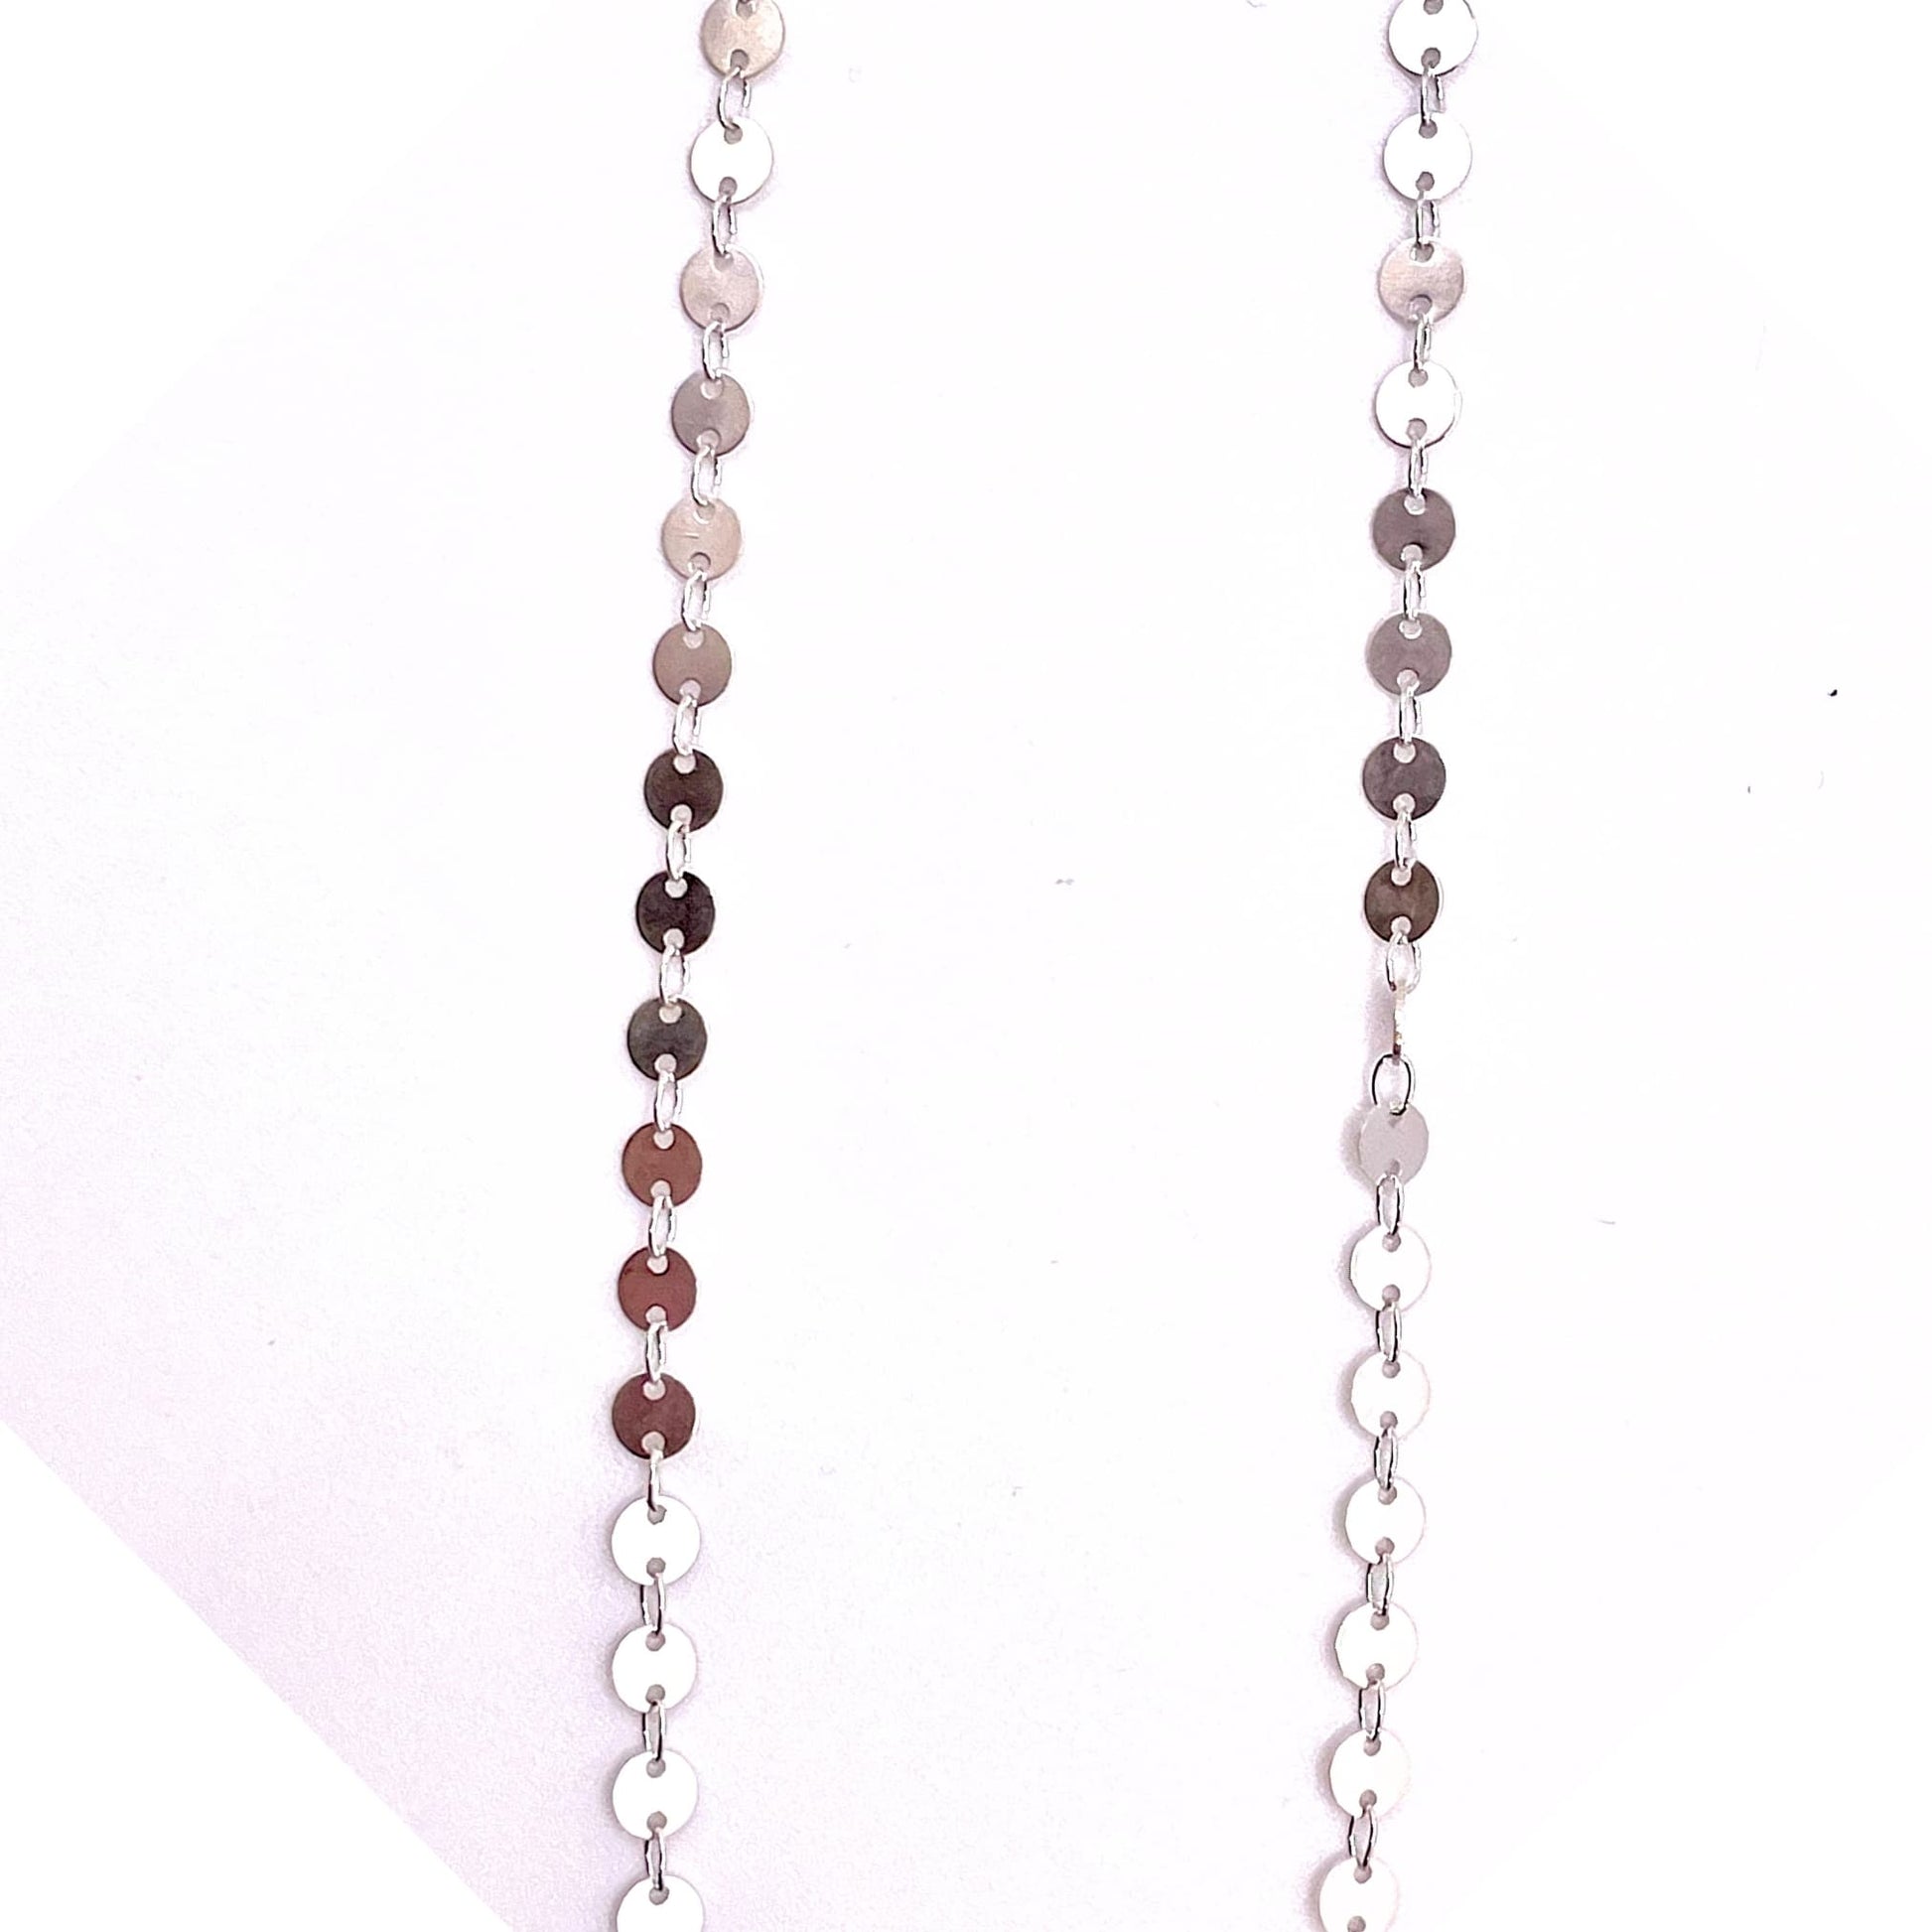 Stretched round sequin disk chain for permanent jewelry.